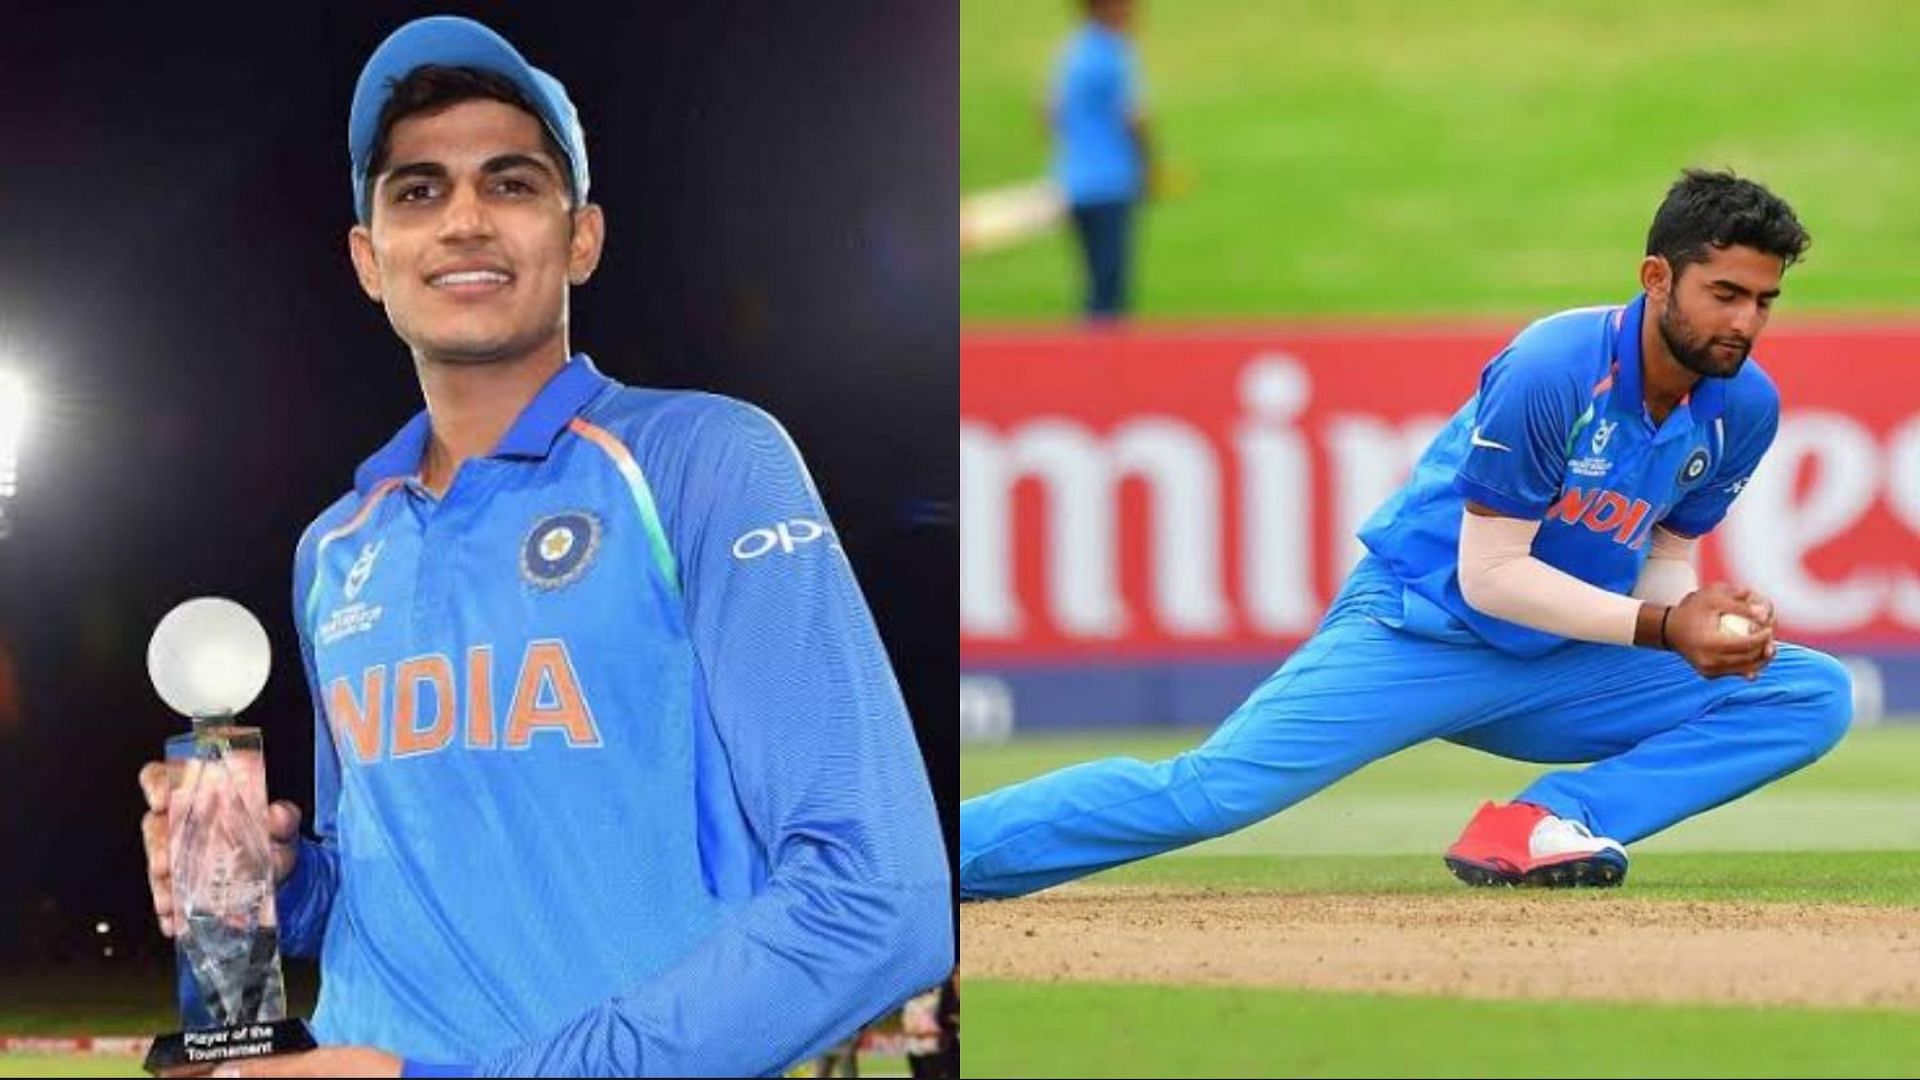 Shubman Gill and Shiva Singh played together at the U-19 level